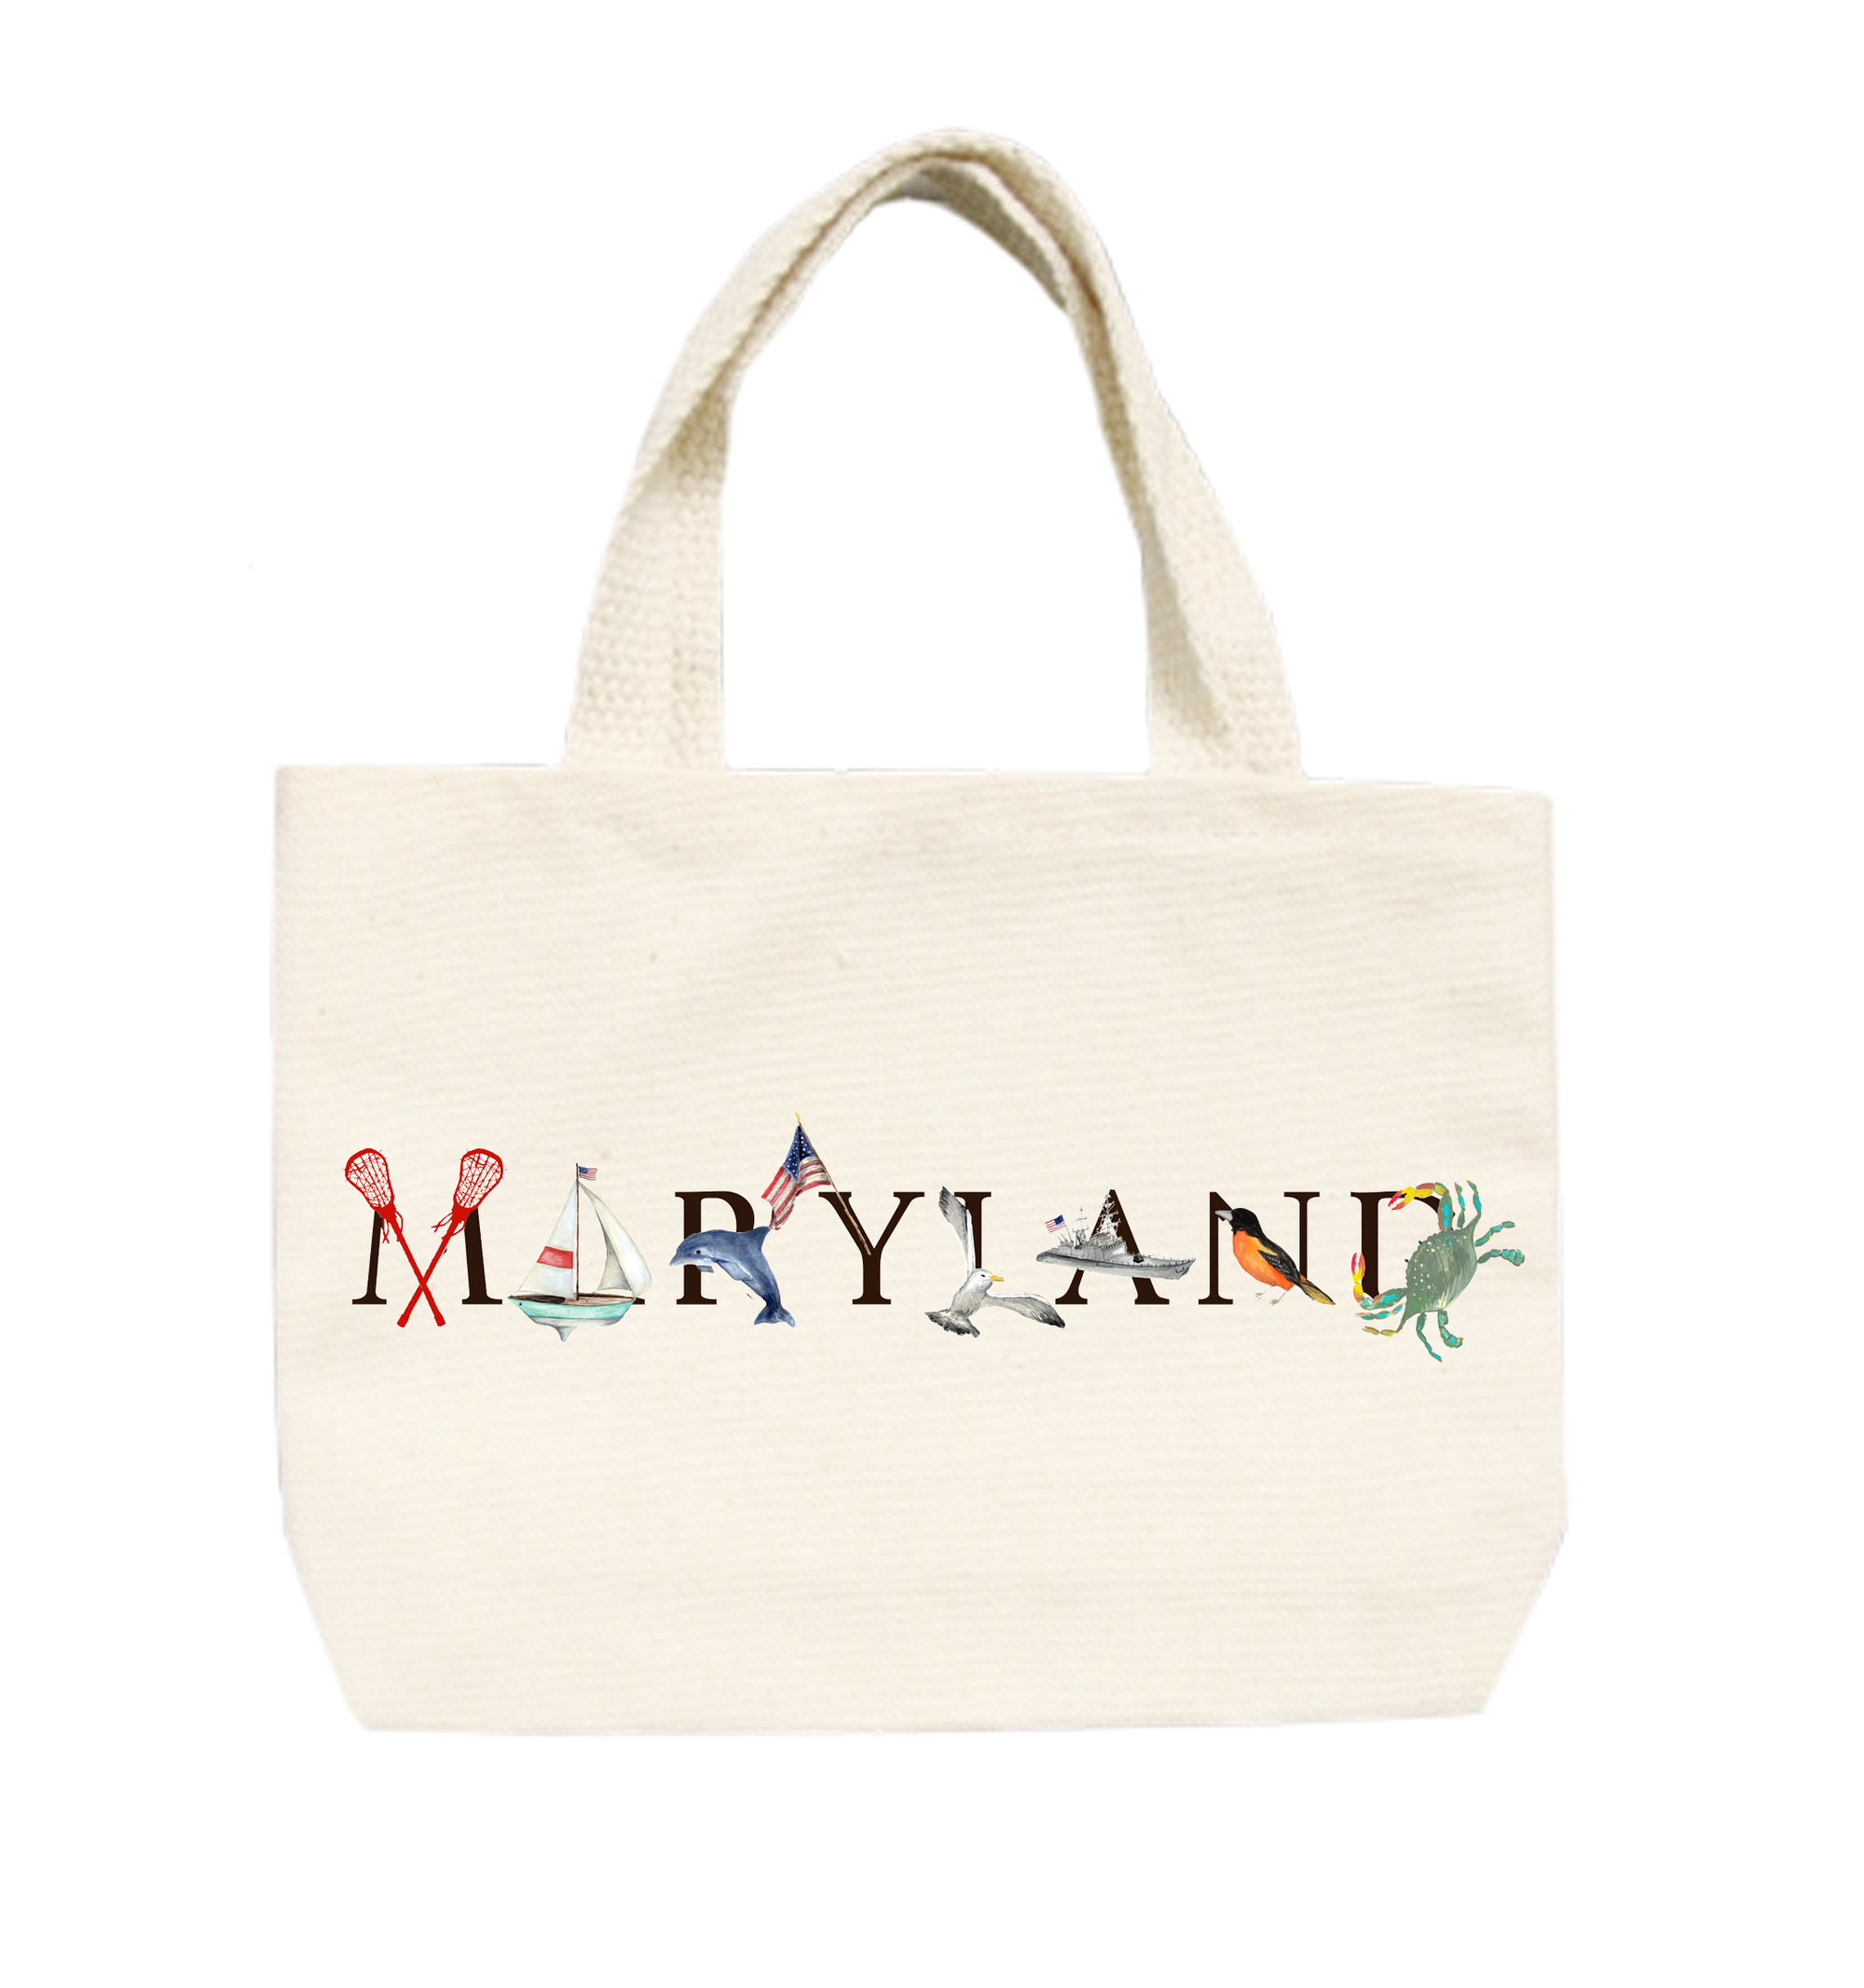 Maryland small tote